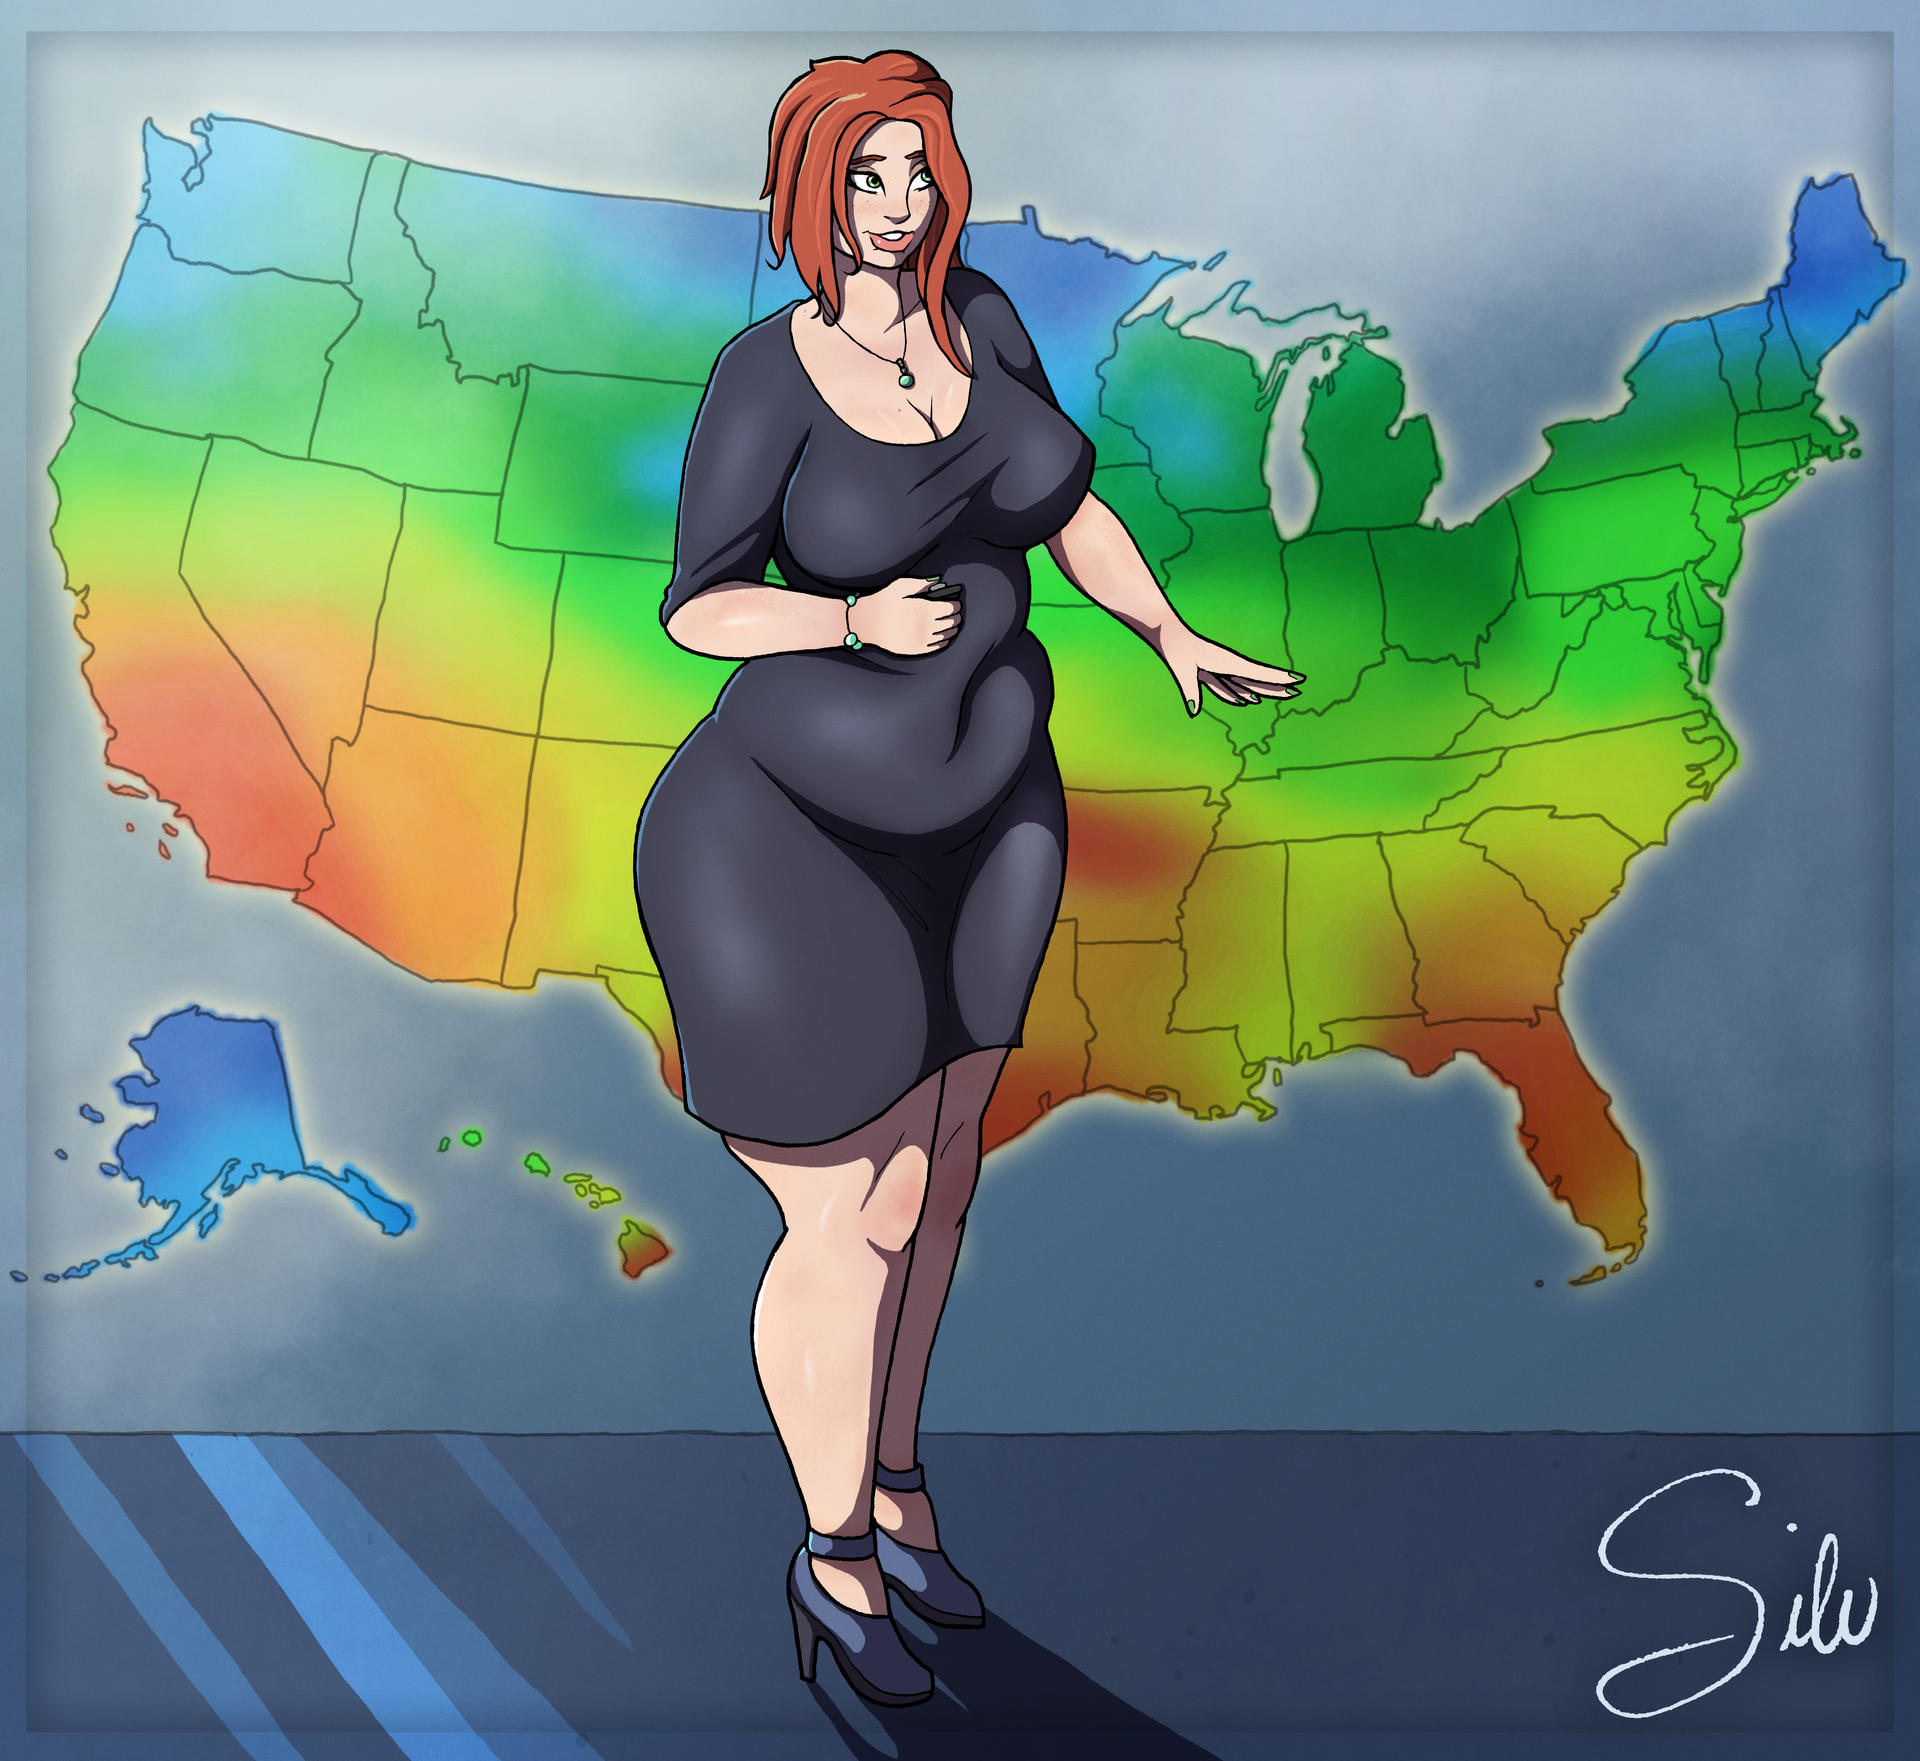 Shelby The Weather Girl The Tutor Commission By Silverpathfinder On Deviantart